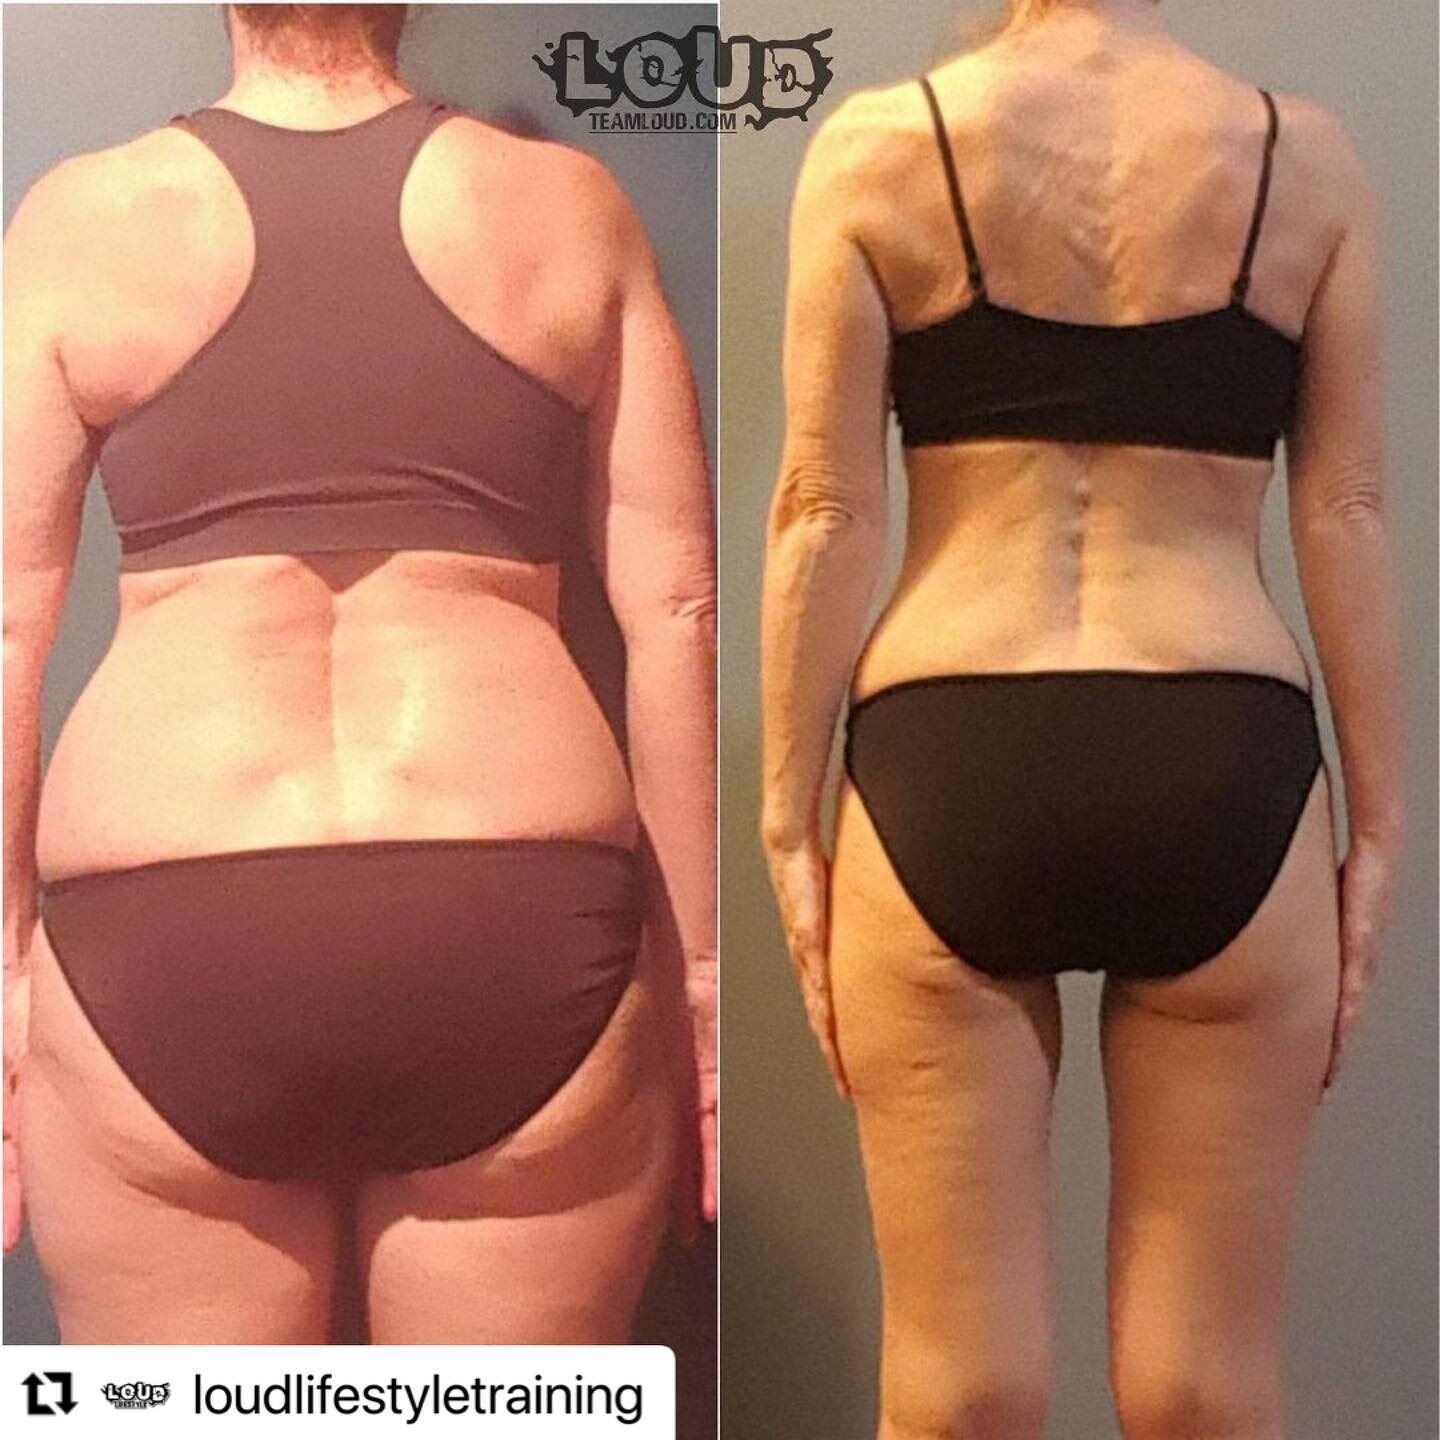 #Repost @loudlifestyletraining with @make_repost
・・・
Here's an EPIC transformation from a client that would like to remain anonymous.
➖
She worked with coach @fitbaileywhit to pull off about 30lbs in just 4 months.
➖
This client excells at fat loss, 